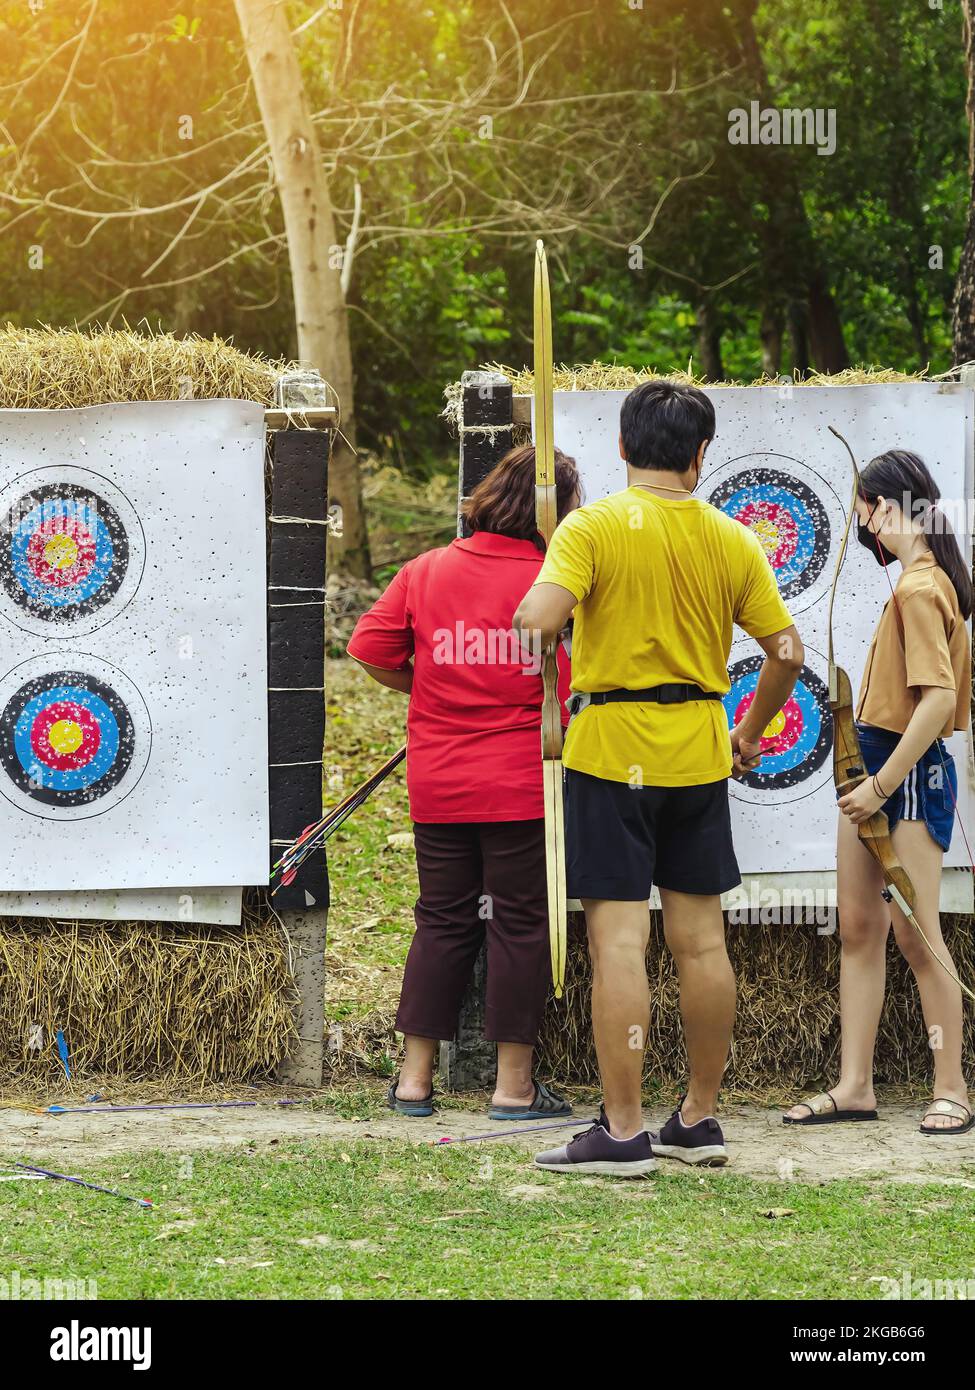 Back view of Asian archers wear face mask collect arrows fired from a bow on sport target. Archer clearing arrows from target to start new game. Medit Stock Photo